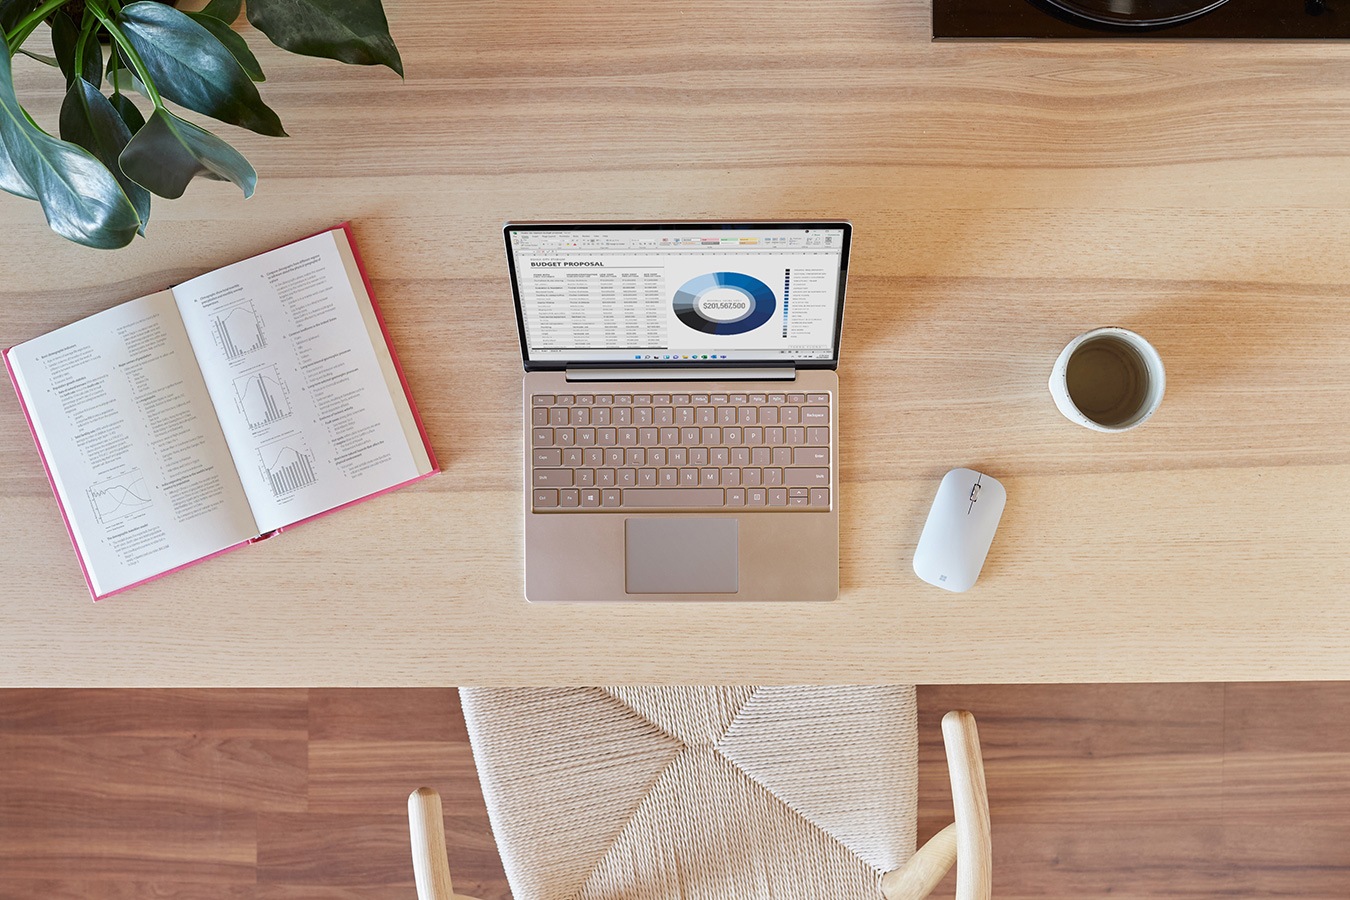 Microsoft Laptop Go on a desk with Surface Mobile Mouse